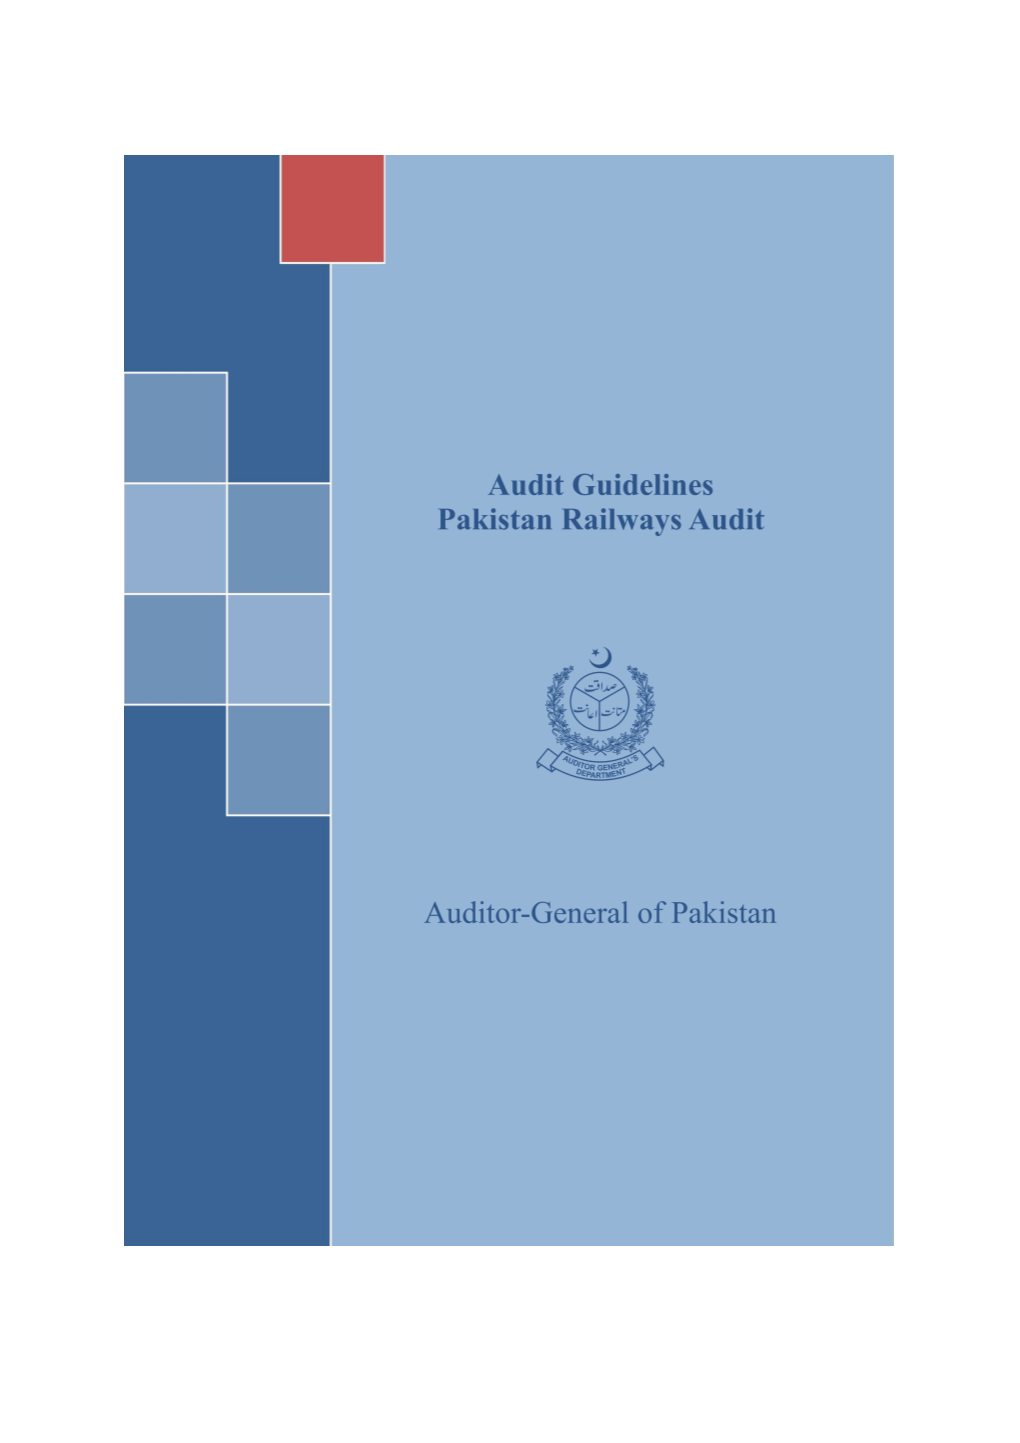 The Auditor-General of Pakistan